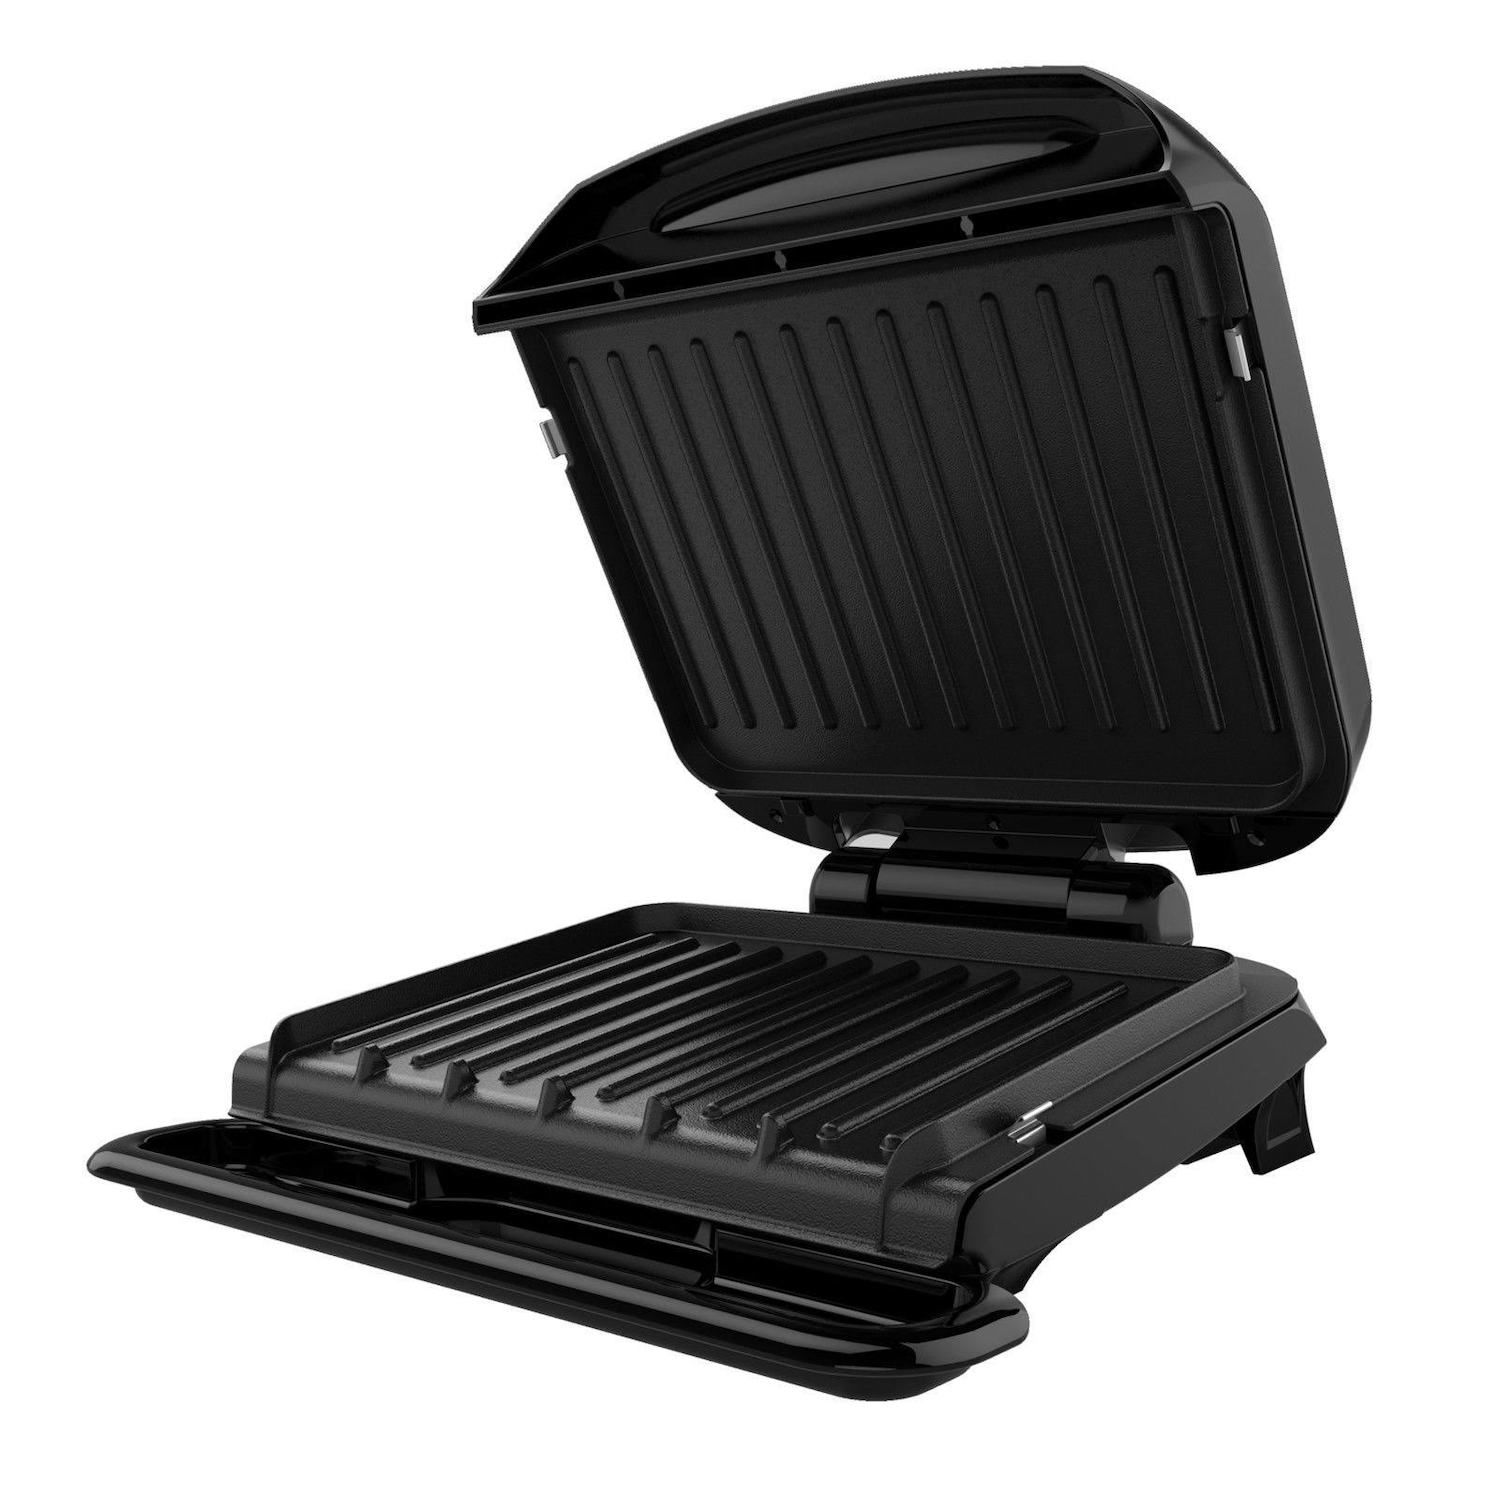 Blue Diamond Electric Contact Sizzle Griddle with Grill and Waffle